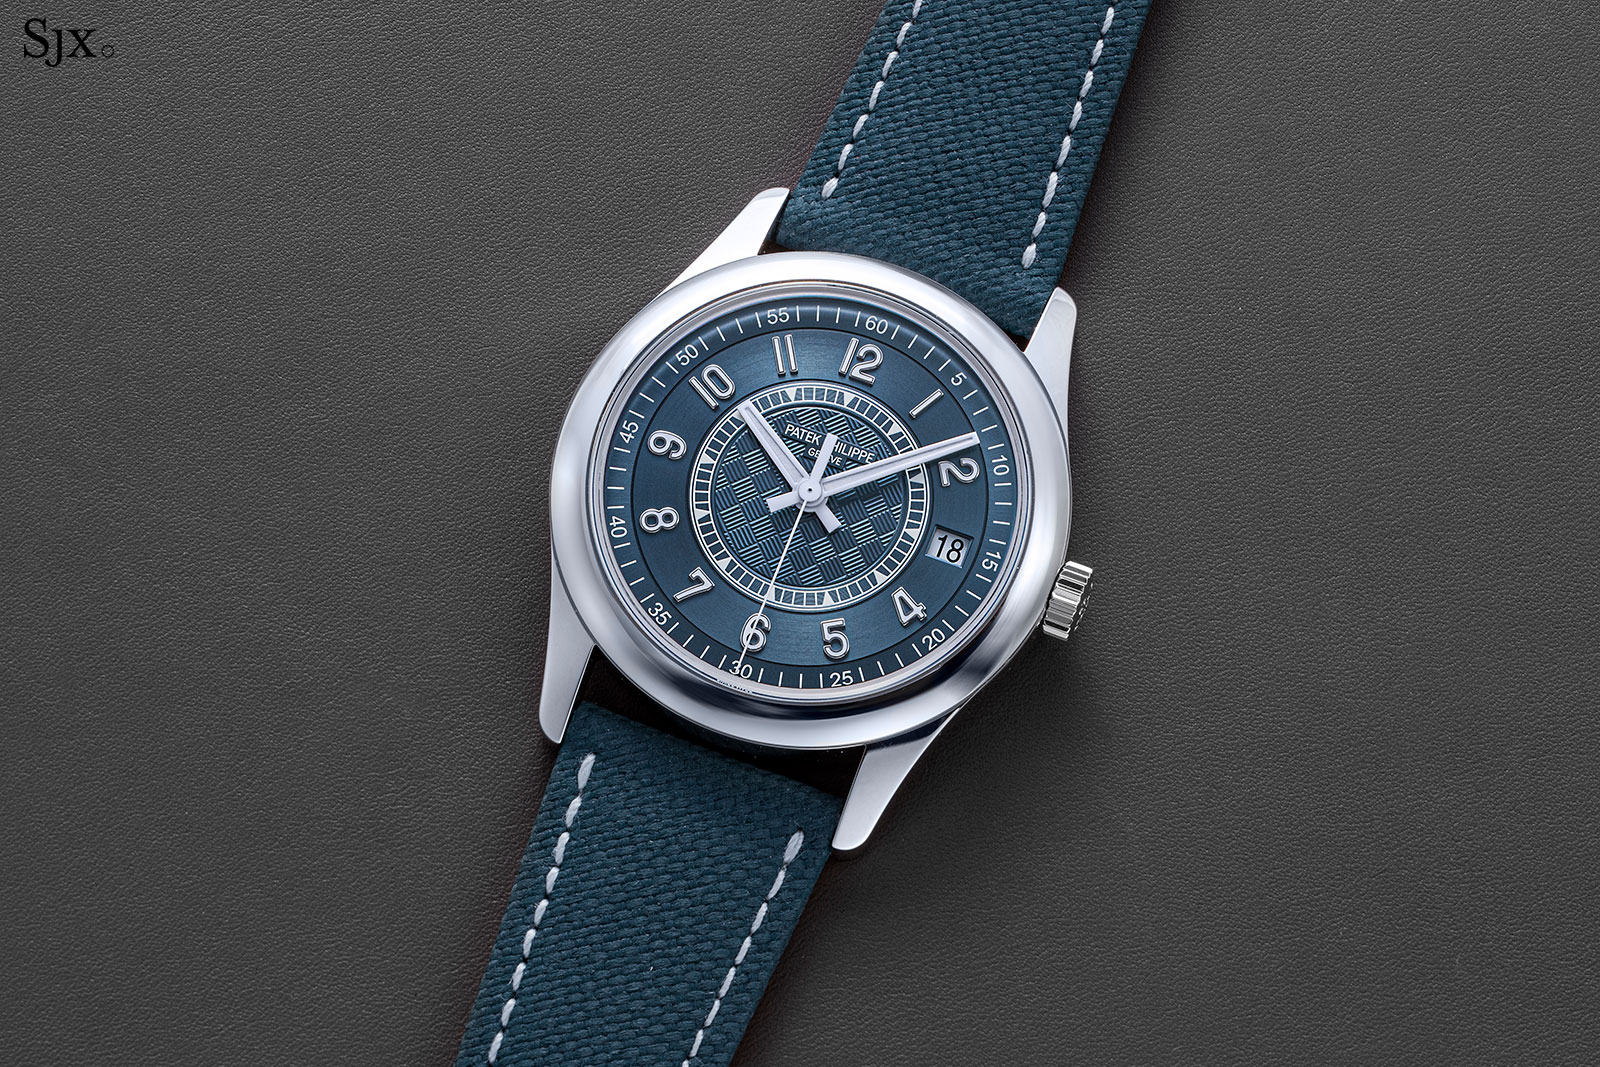 First Look: Patek Philippe Delivers Color And Sportiness With The Calatrava  6007G Watch